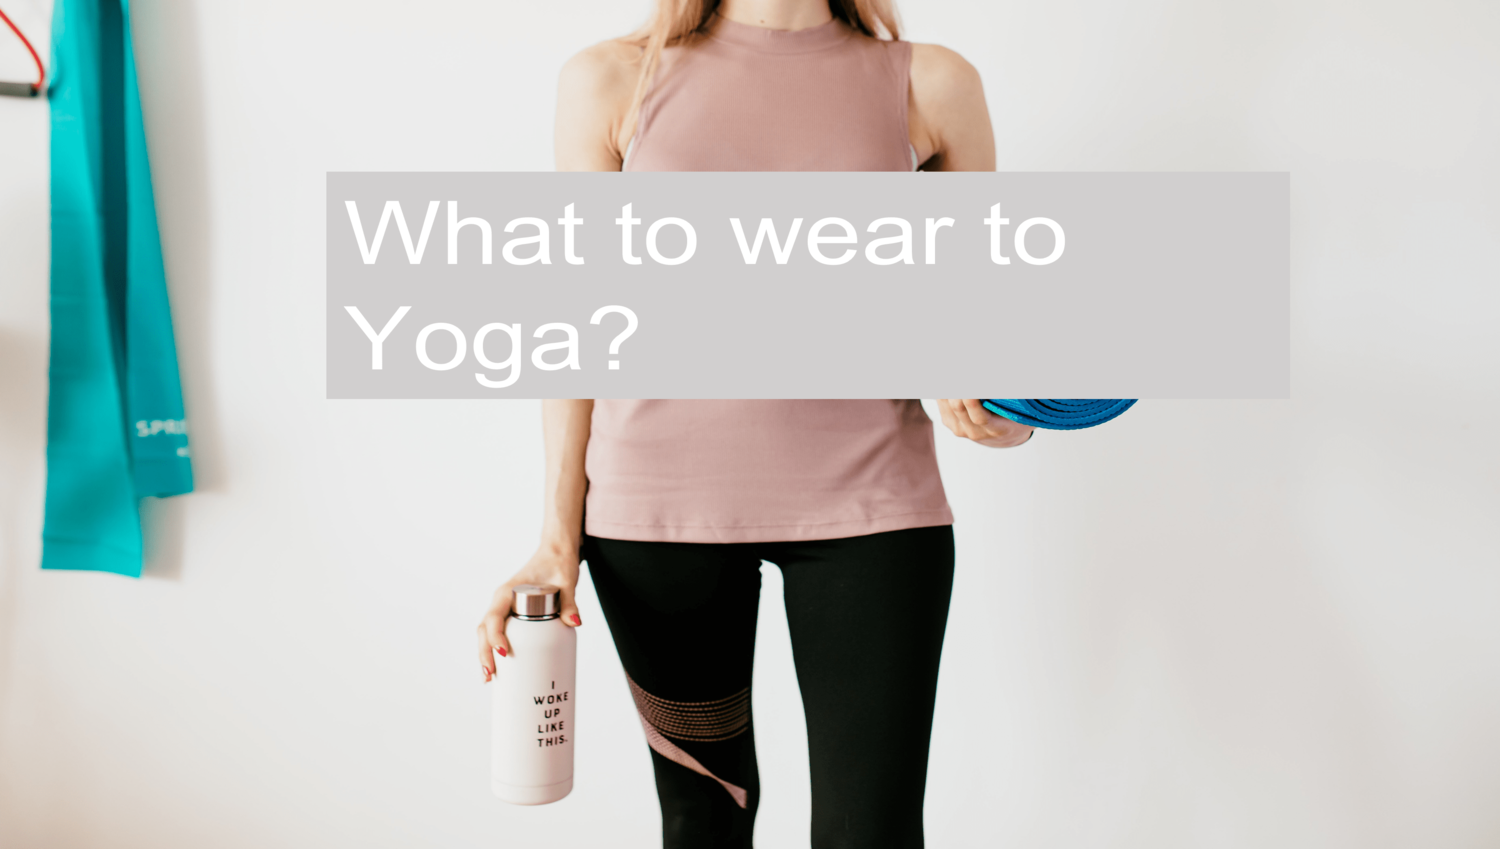 https://myathleisure.co.uk/wp-content/uploads/2021/10/what-to-wear-to-yoga-v1-1.png